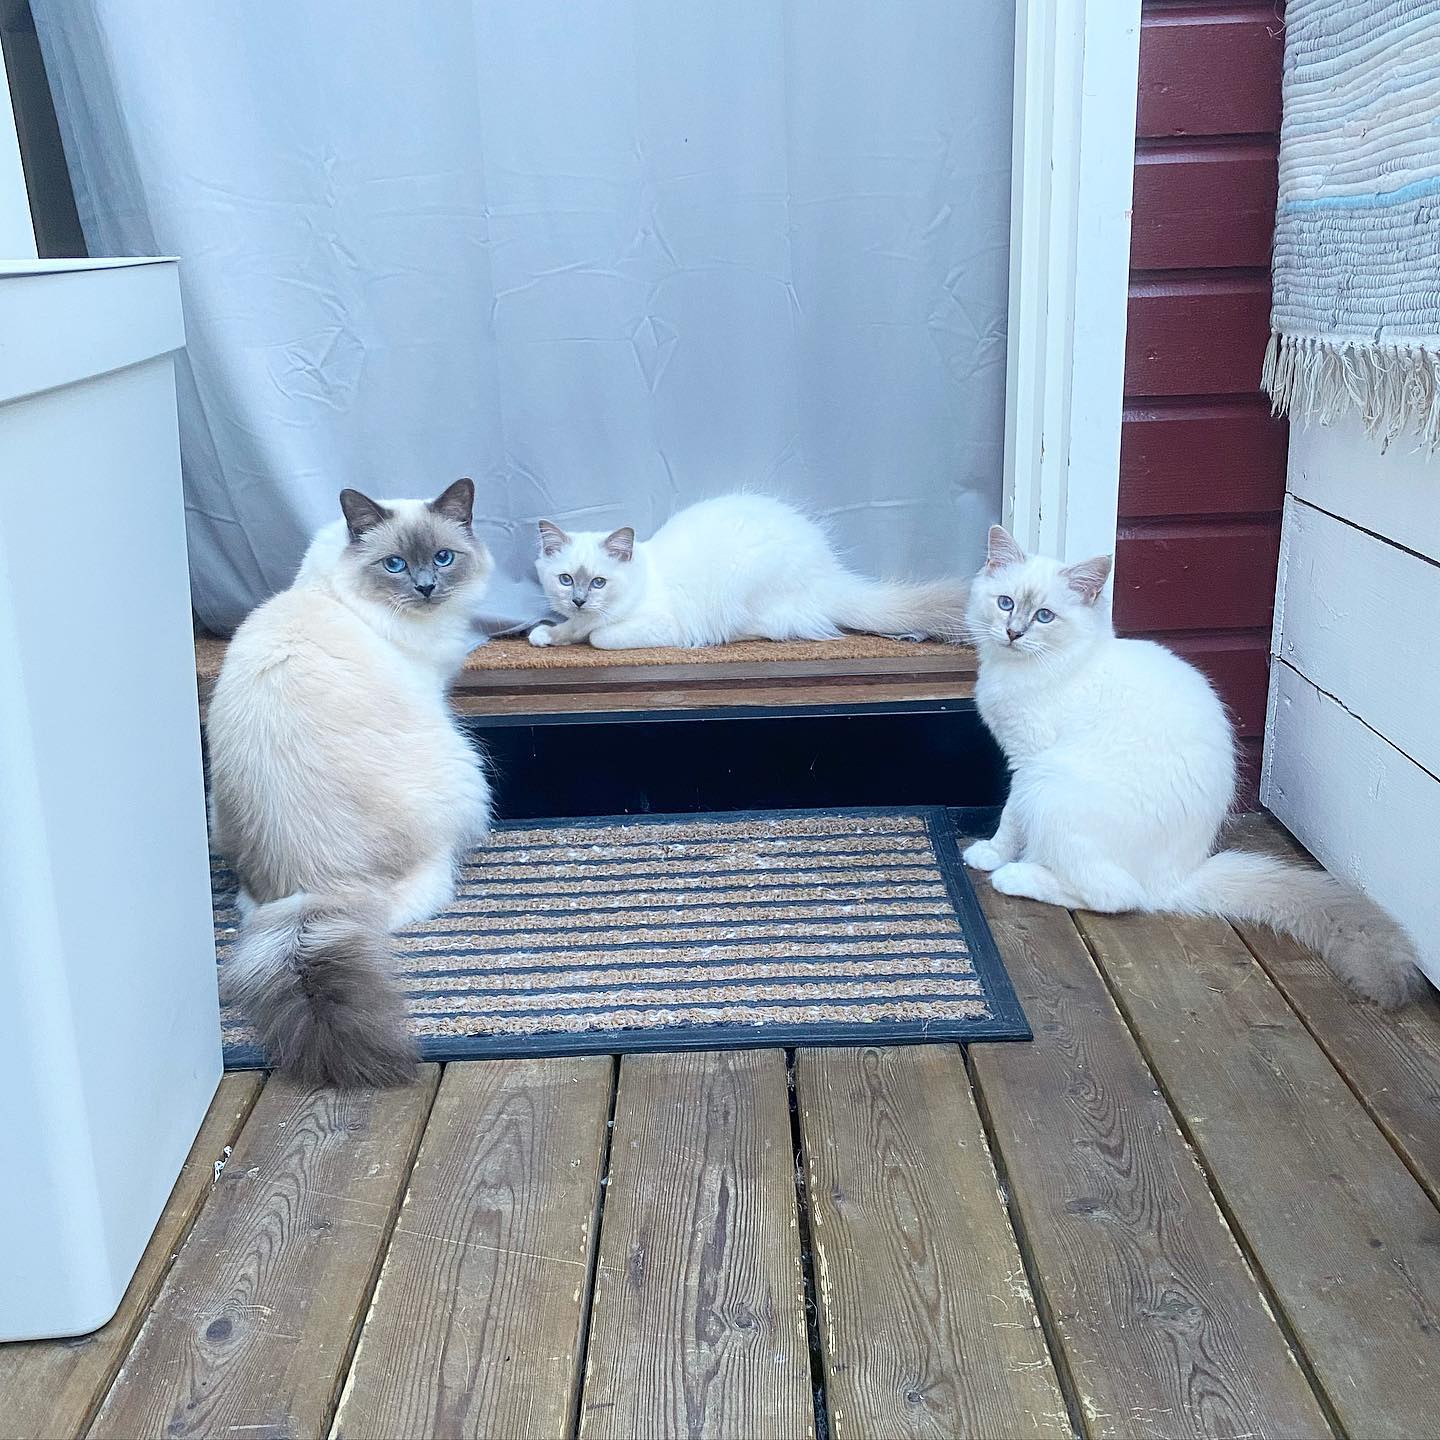 #sepinkaliciouscookie Cookie has a perfect summer, her own summer camp at home with her two brothers Sherman and Leo #minihollys2021 #minihollys2022 #birma #birman #breeder #catsofinstagram #chokladochvanilj #pinkalicious #welovecats #we_love_cats #excellent_cats #bestcats_oftheworld #birman_feature #birmavanner #iphone11promax